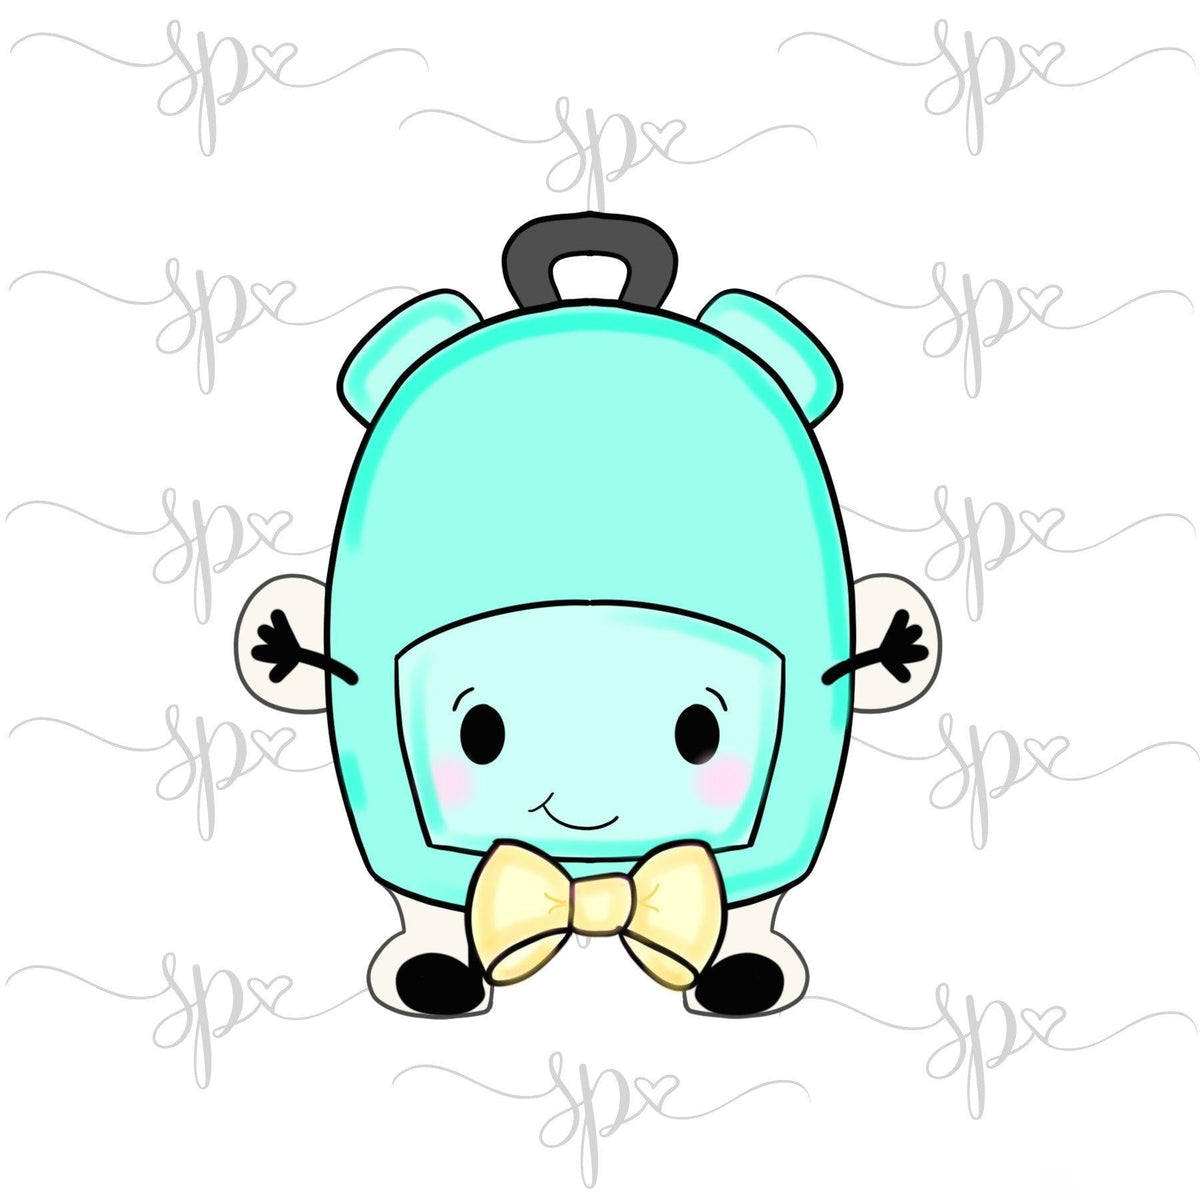 Bow Tie Backpack Kid Cookie Cutter - Sweetleigh 